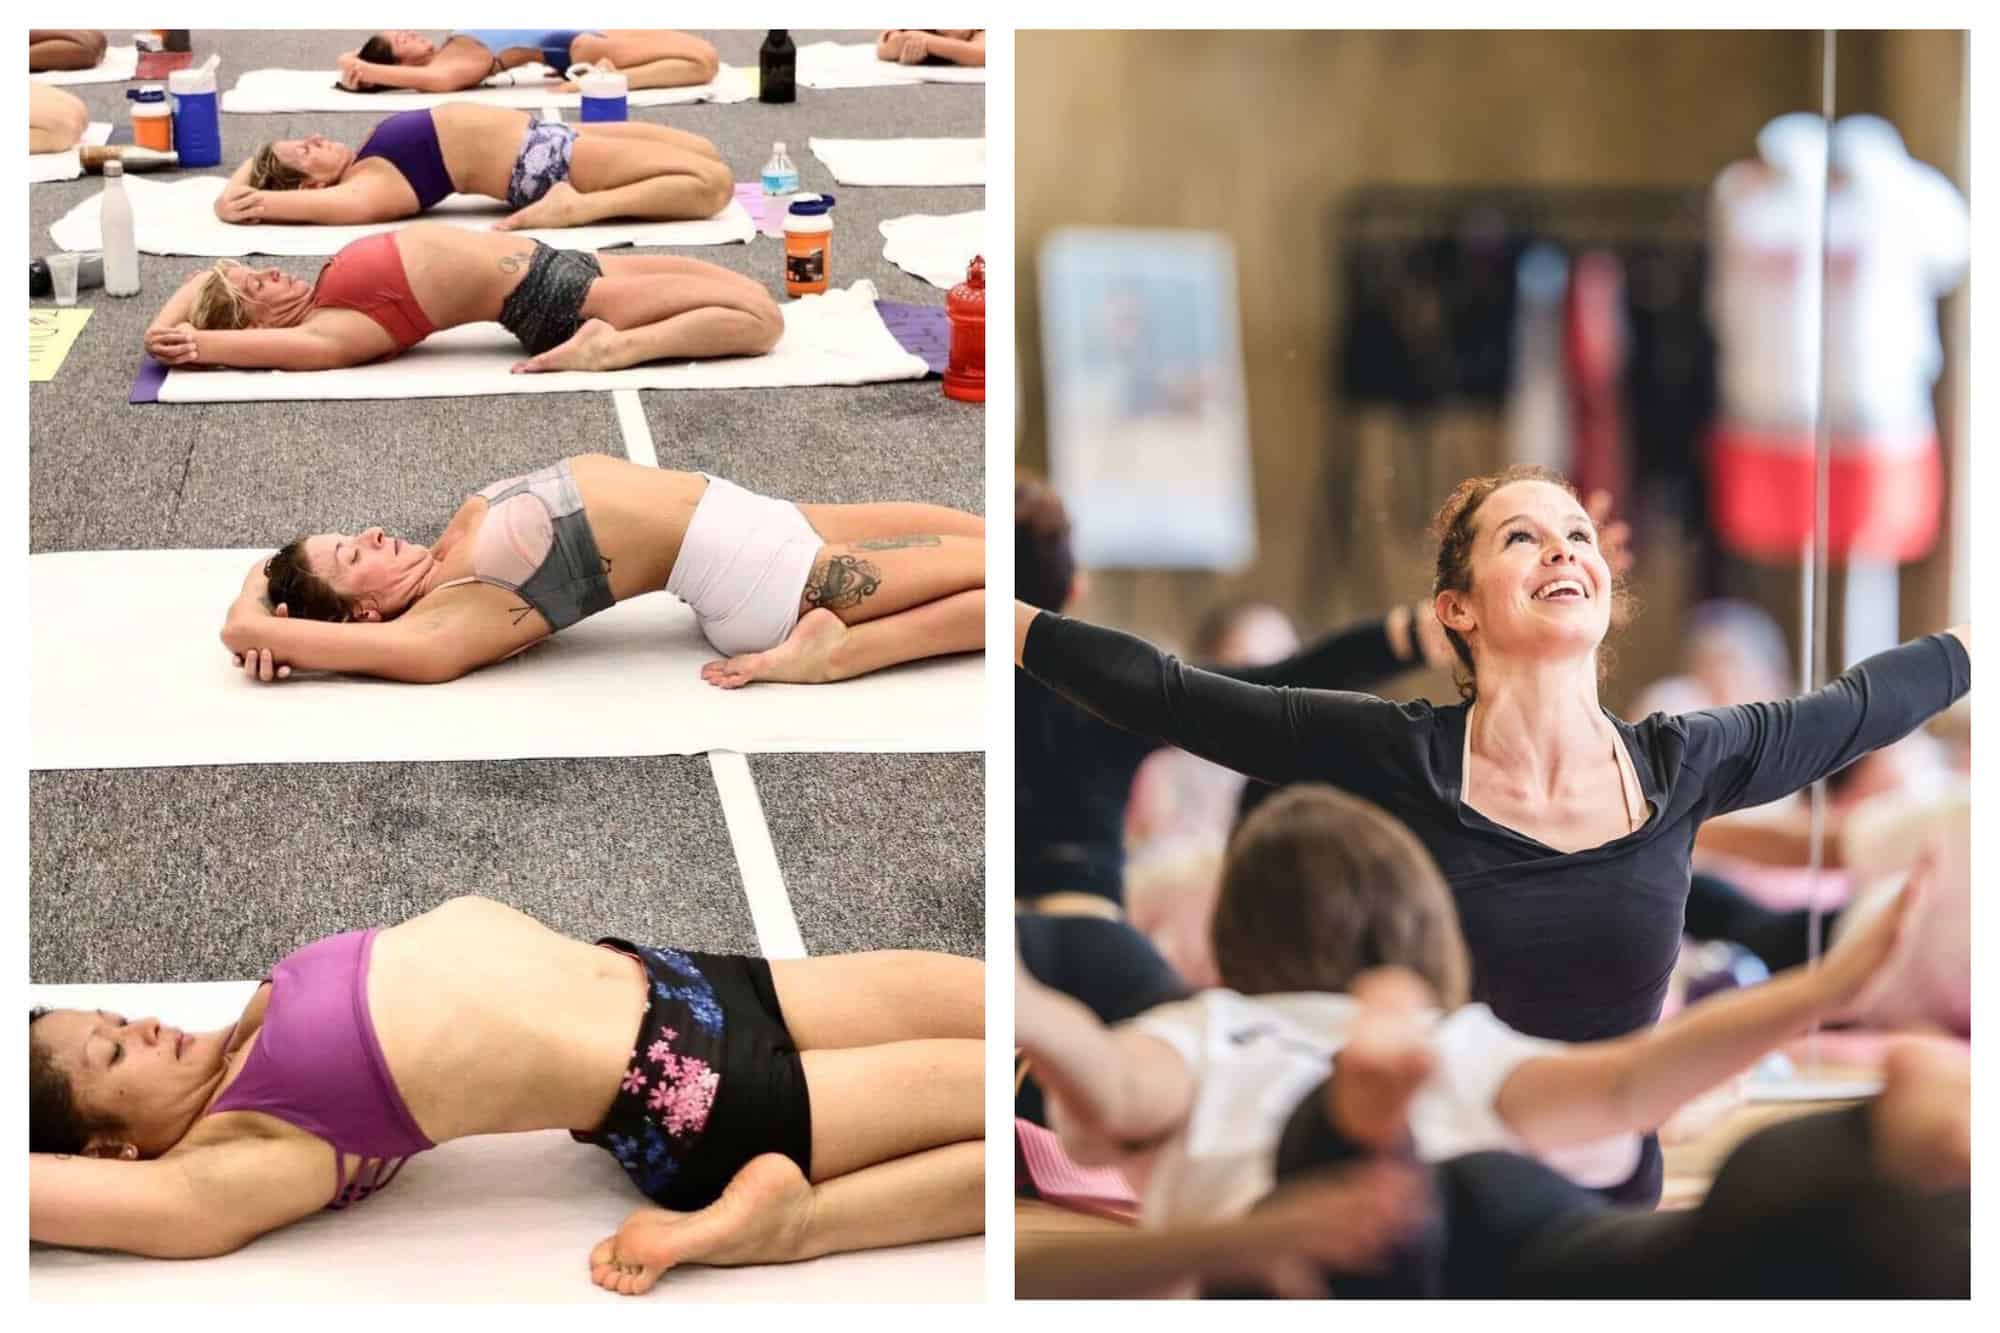 Left: Participants in a hot yoga class are in a lying pose with their torso area curled upwards. Right: A smiling instructor is giving her eagle pose to a yoga class.